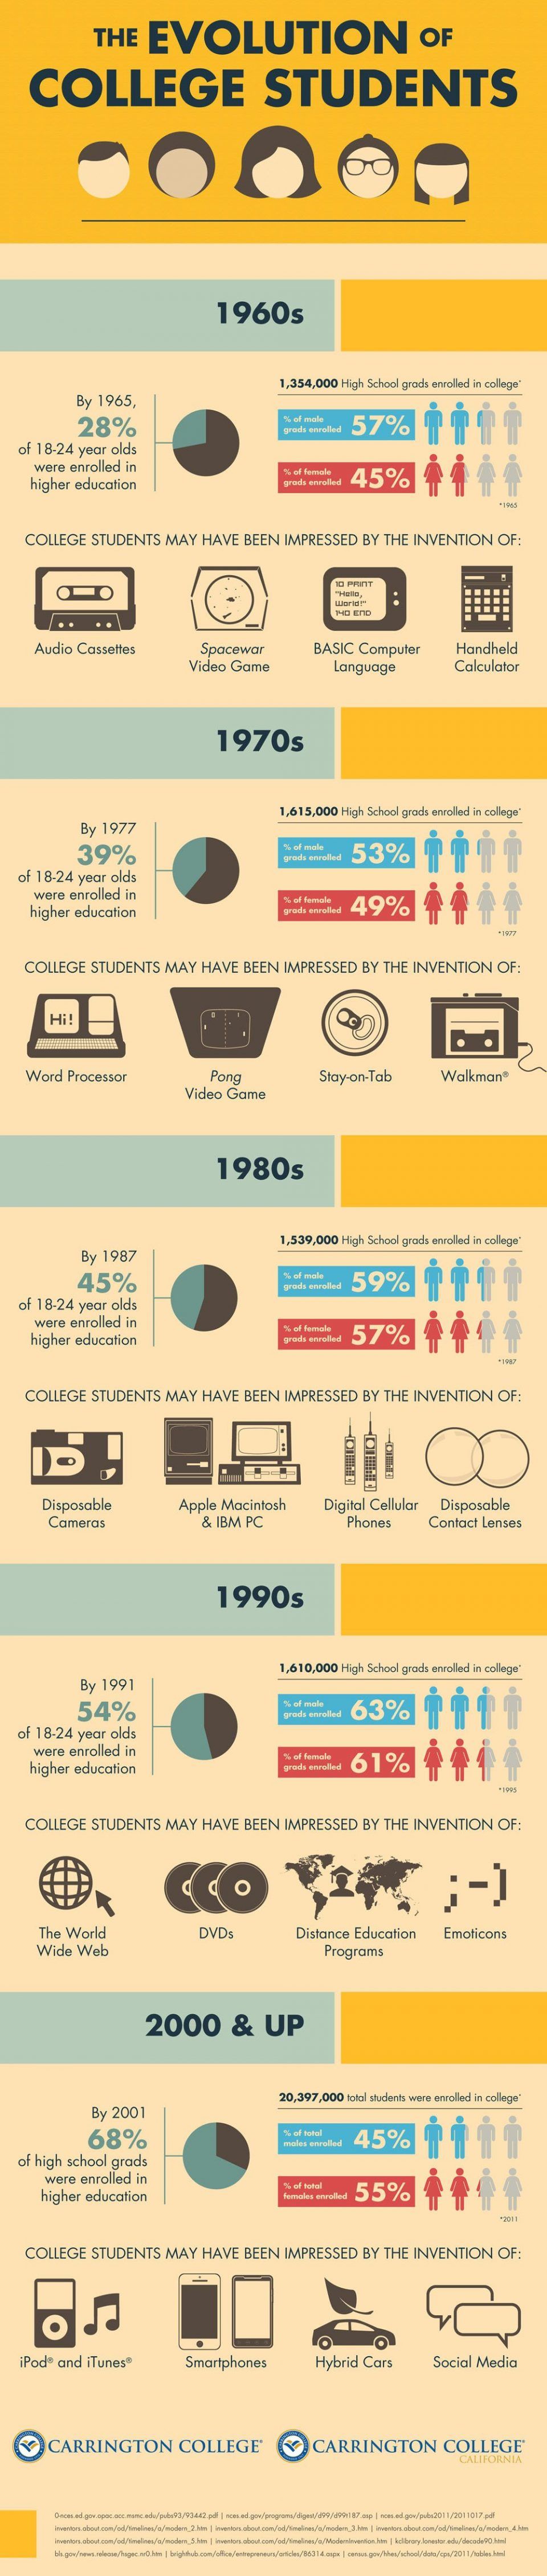 The Evolution of College Students Infographic - e-Learning 